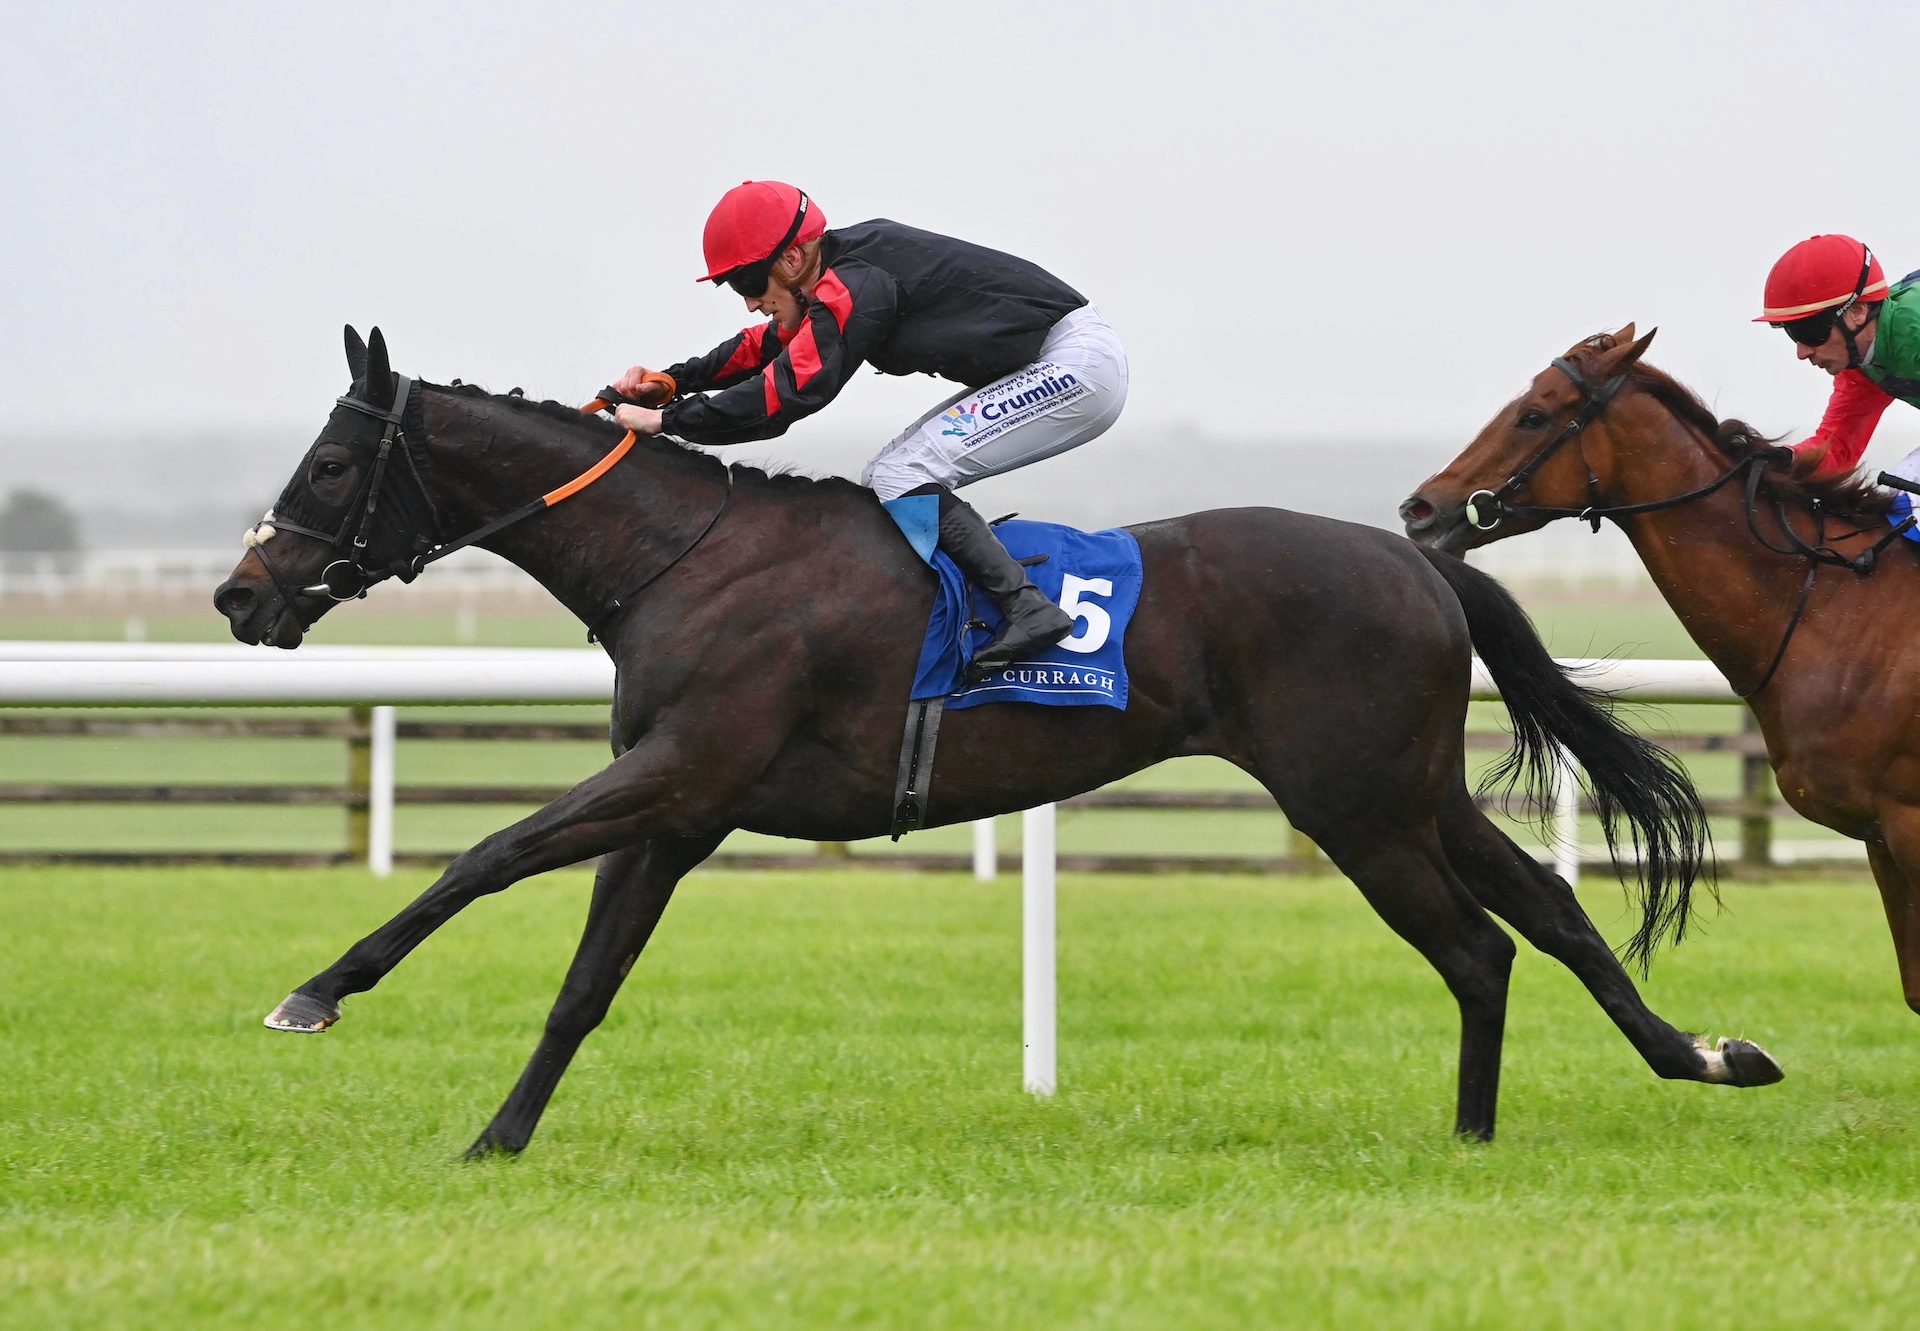 Ocean Jewel (Sioux Nation) Wins The Group 2 Lanwades Stud Stakes At The Curragh